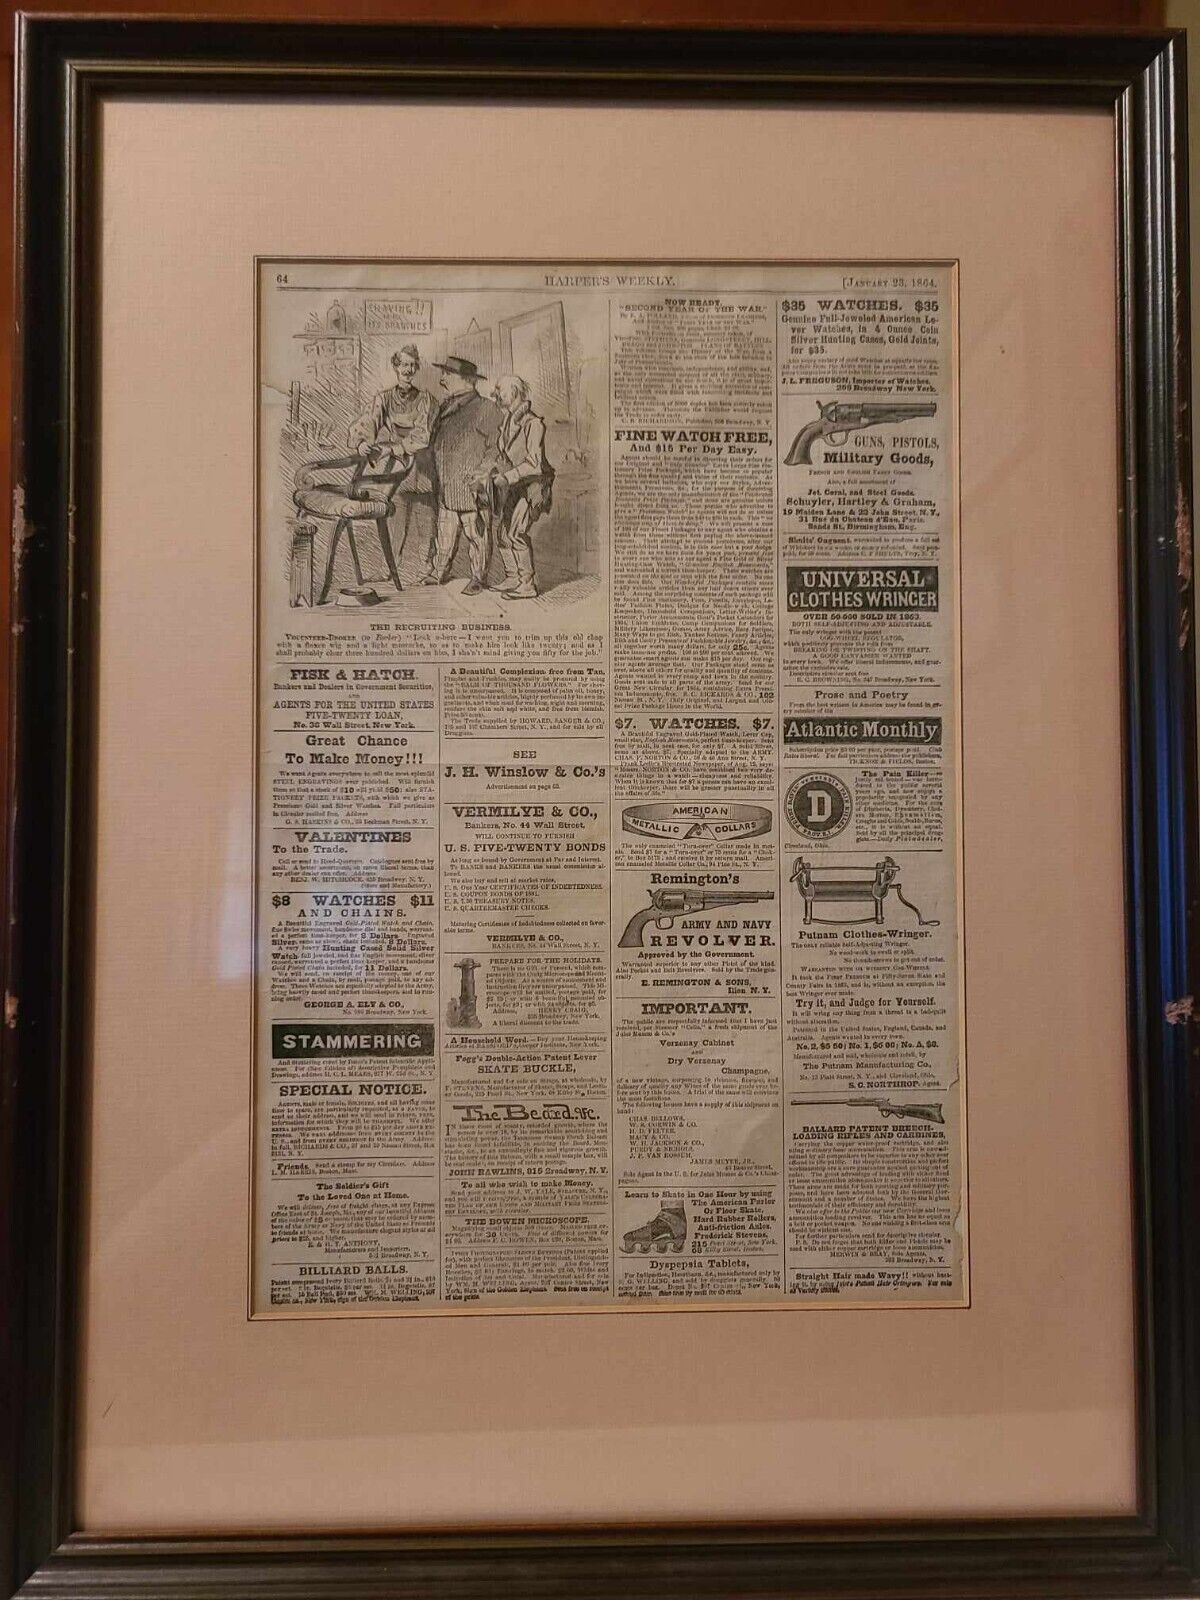 Harpers Weekly January 23, 1864 - Civil War, Professionally Framed Single Page